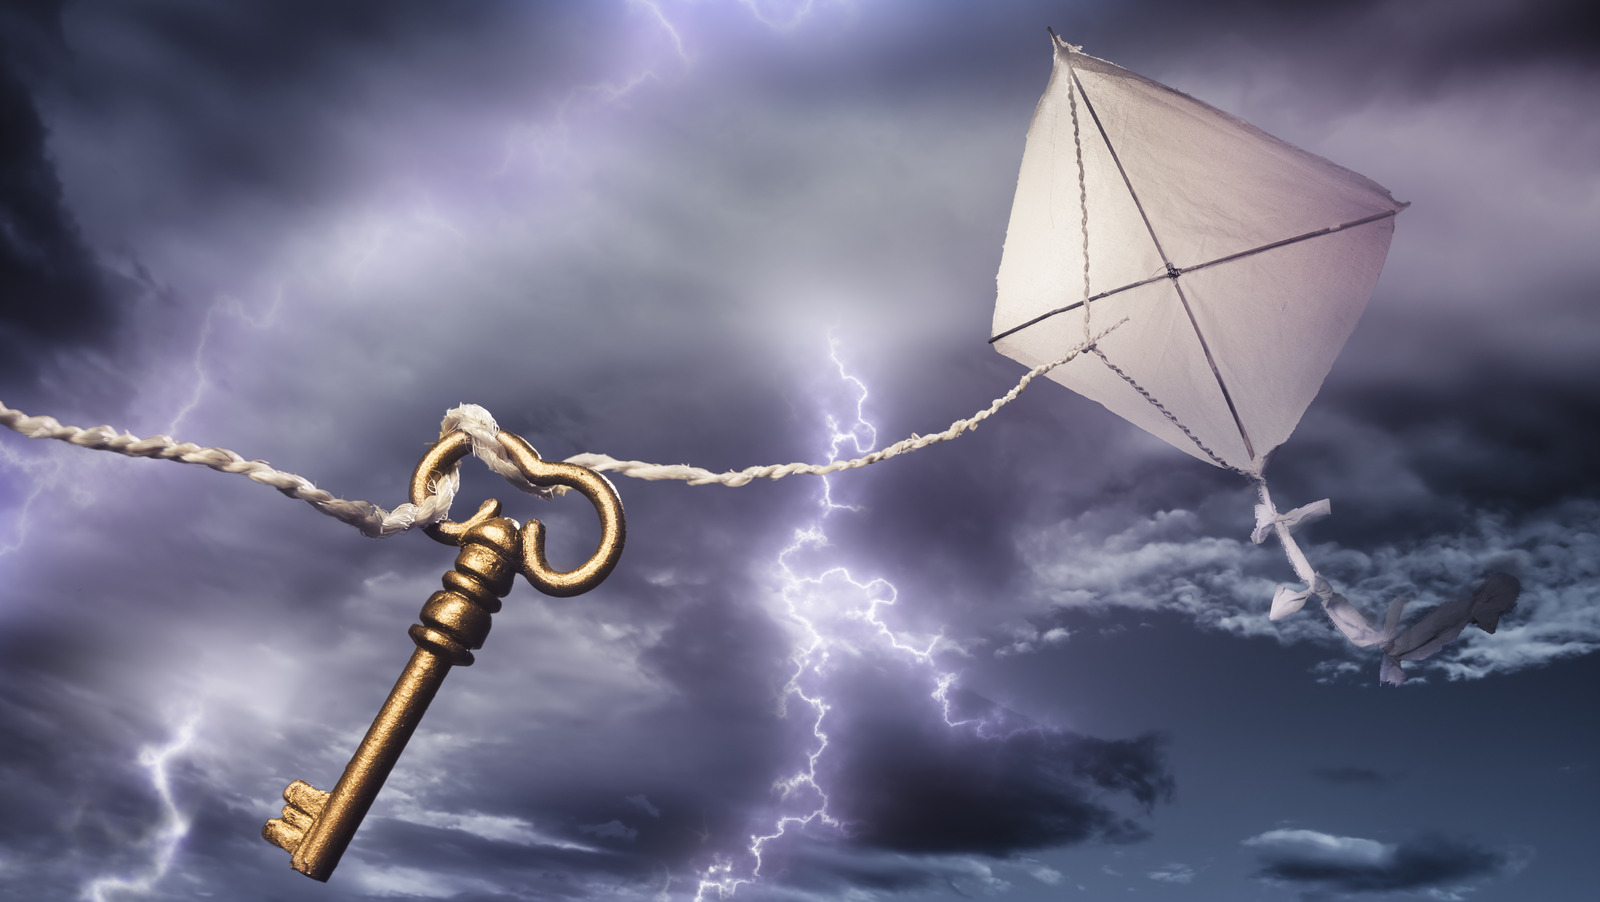 Do You Need A Lightning Rod To Protect Your Home?